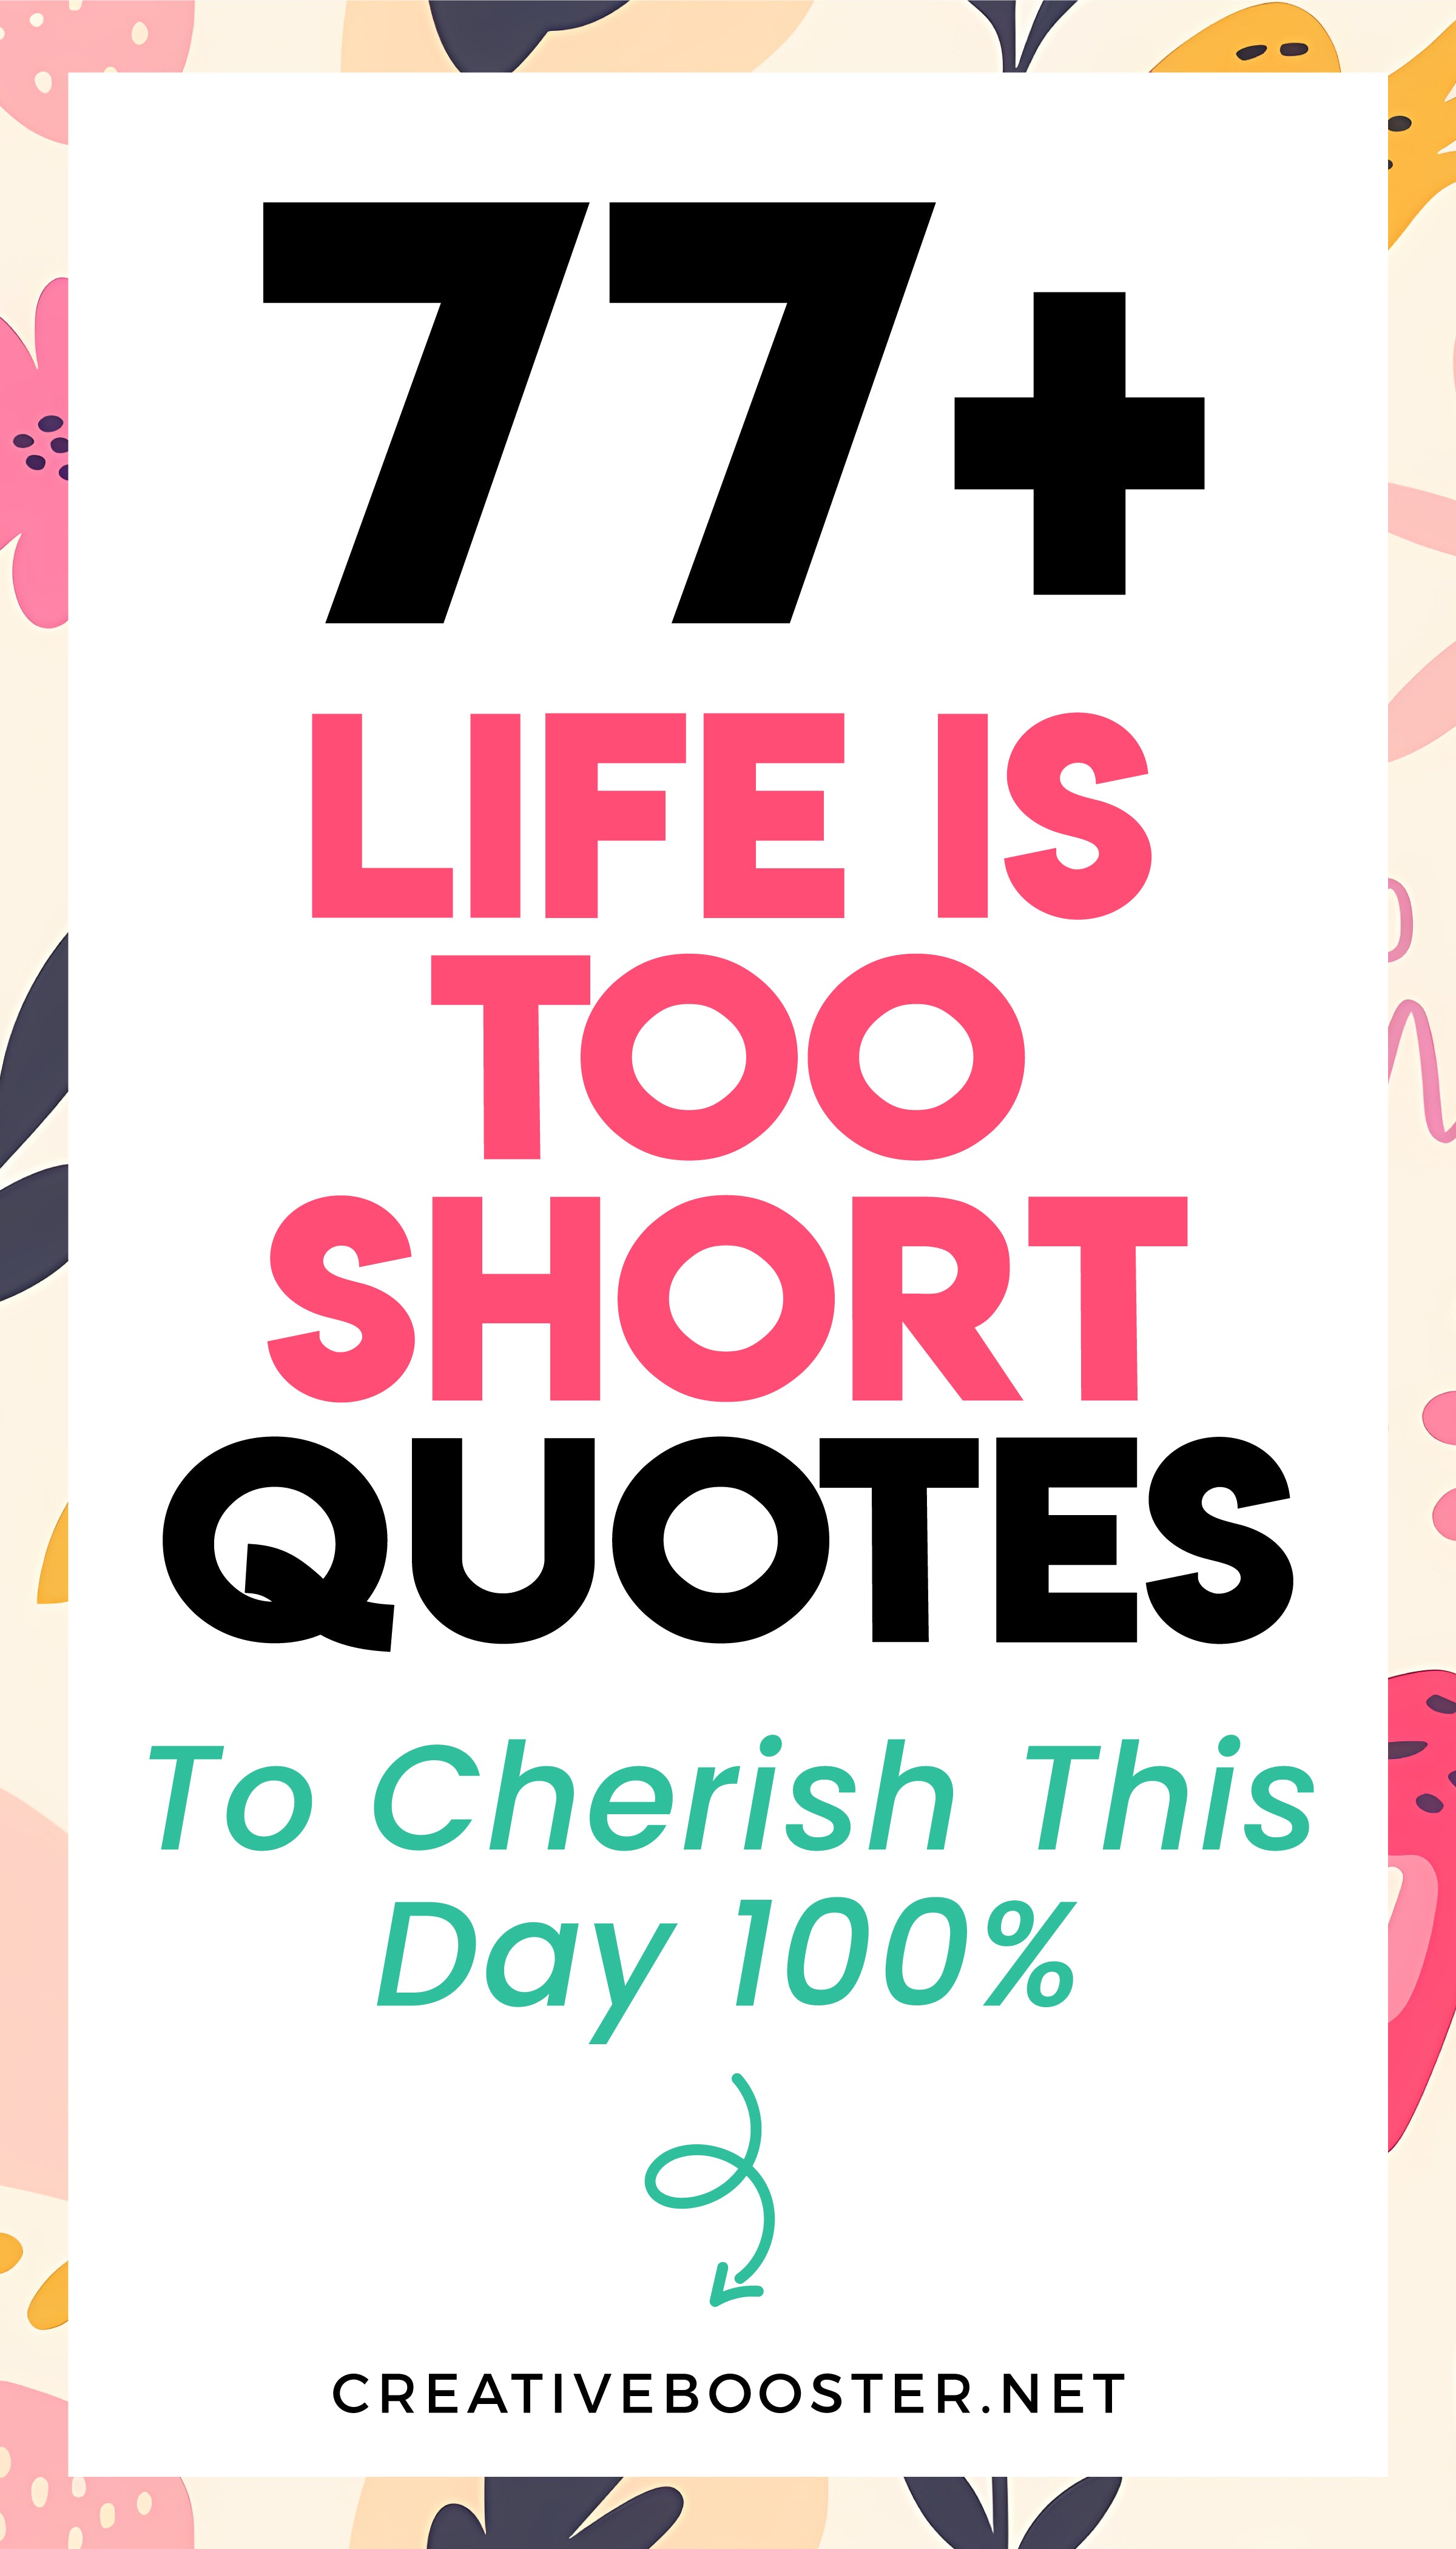 Best-Life-is-Too-Short-Quotes-Pinterest-Tall-1